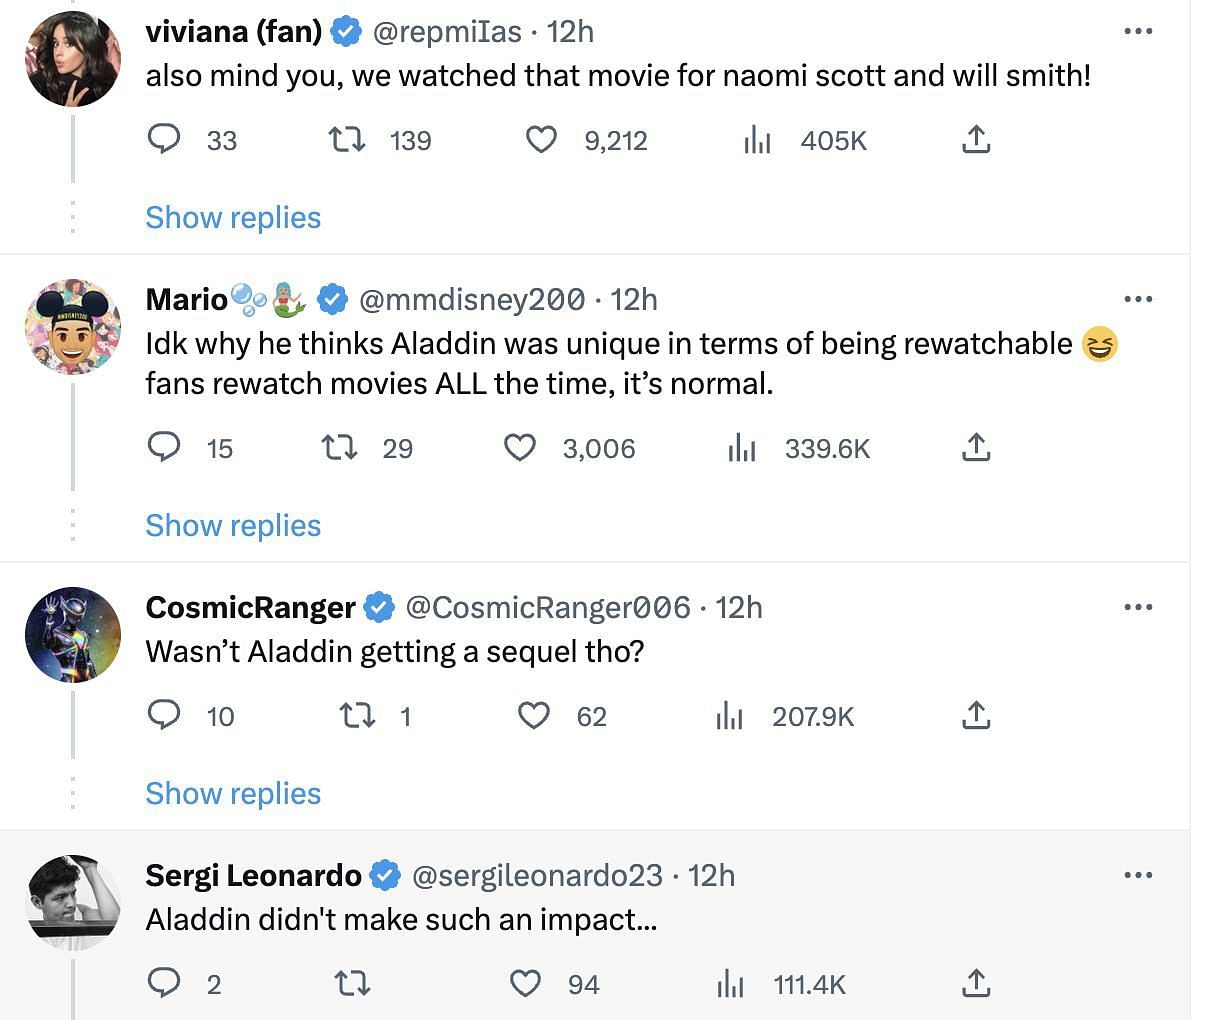 Social media users lash out on the &quot;Aladdin&quot; actor as he passed controversial comments on The Little Mermaid. (Image via Twitter)